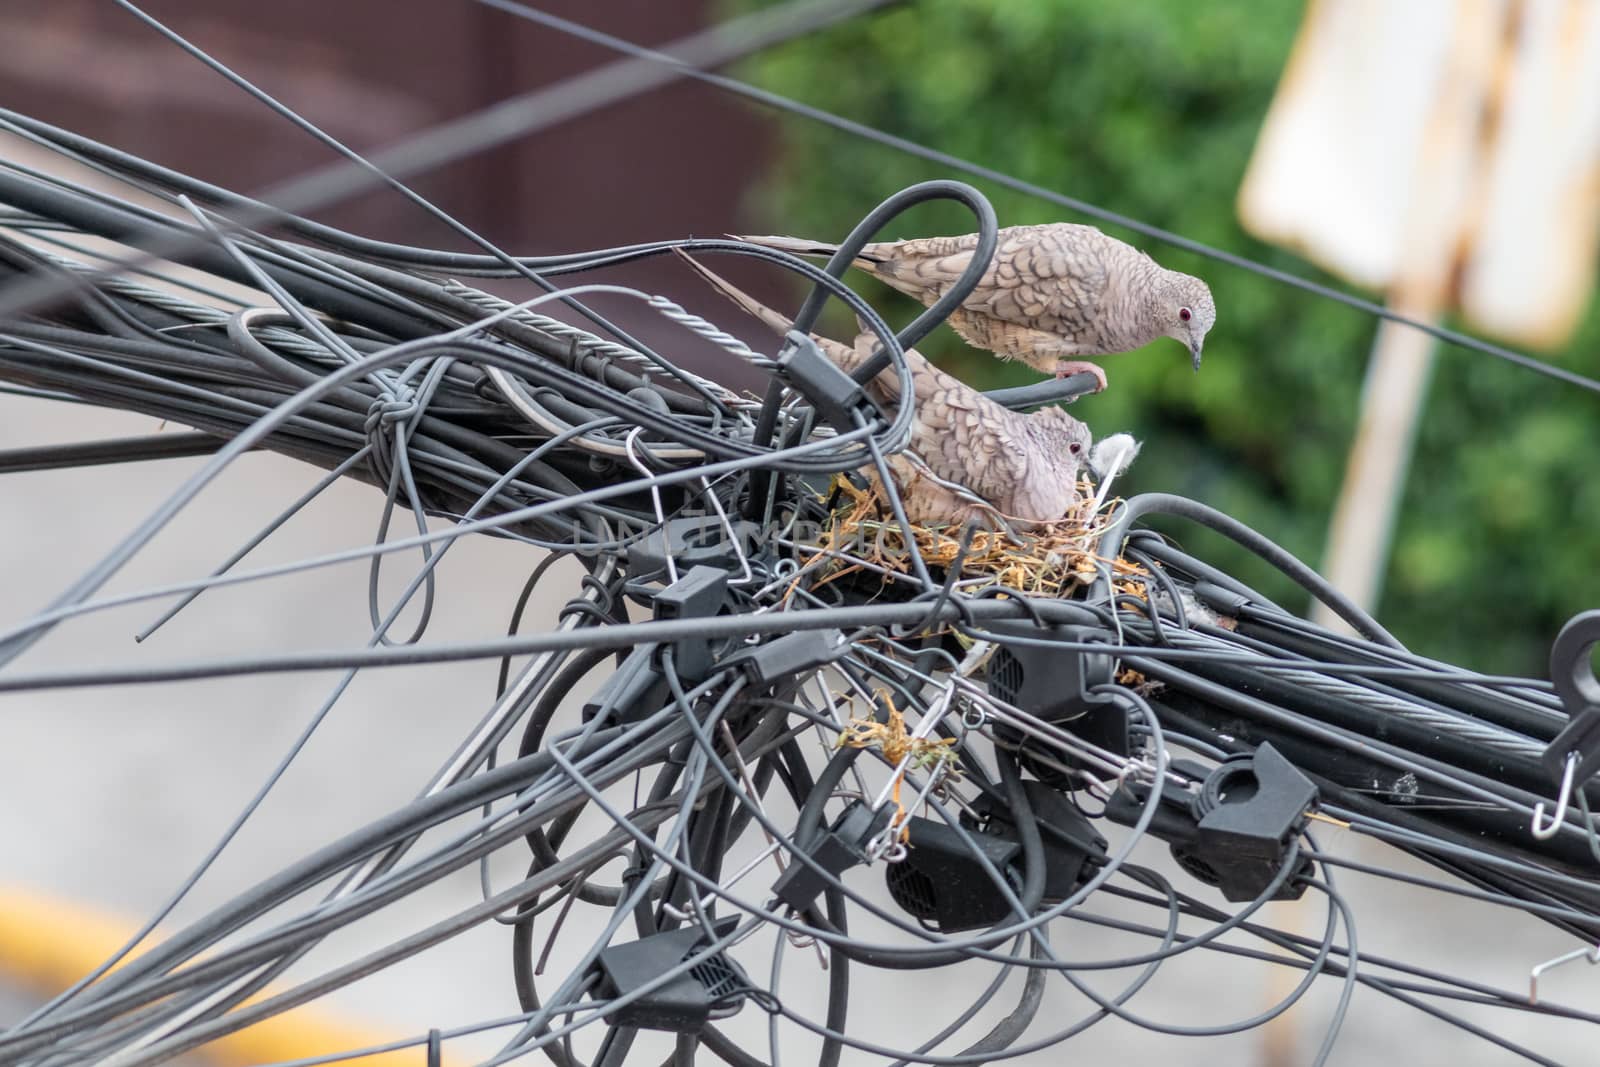 Pair of dove birds making their nest in some light cables. by leo_de_la_garza